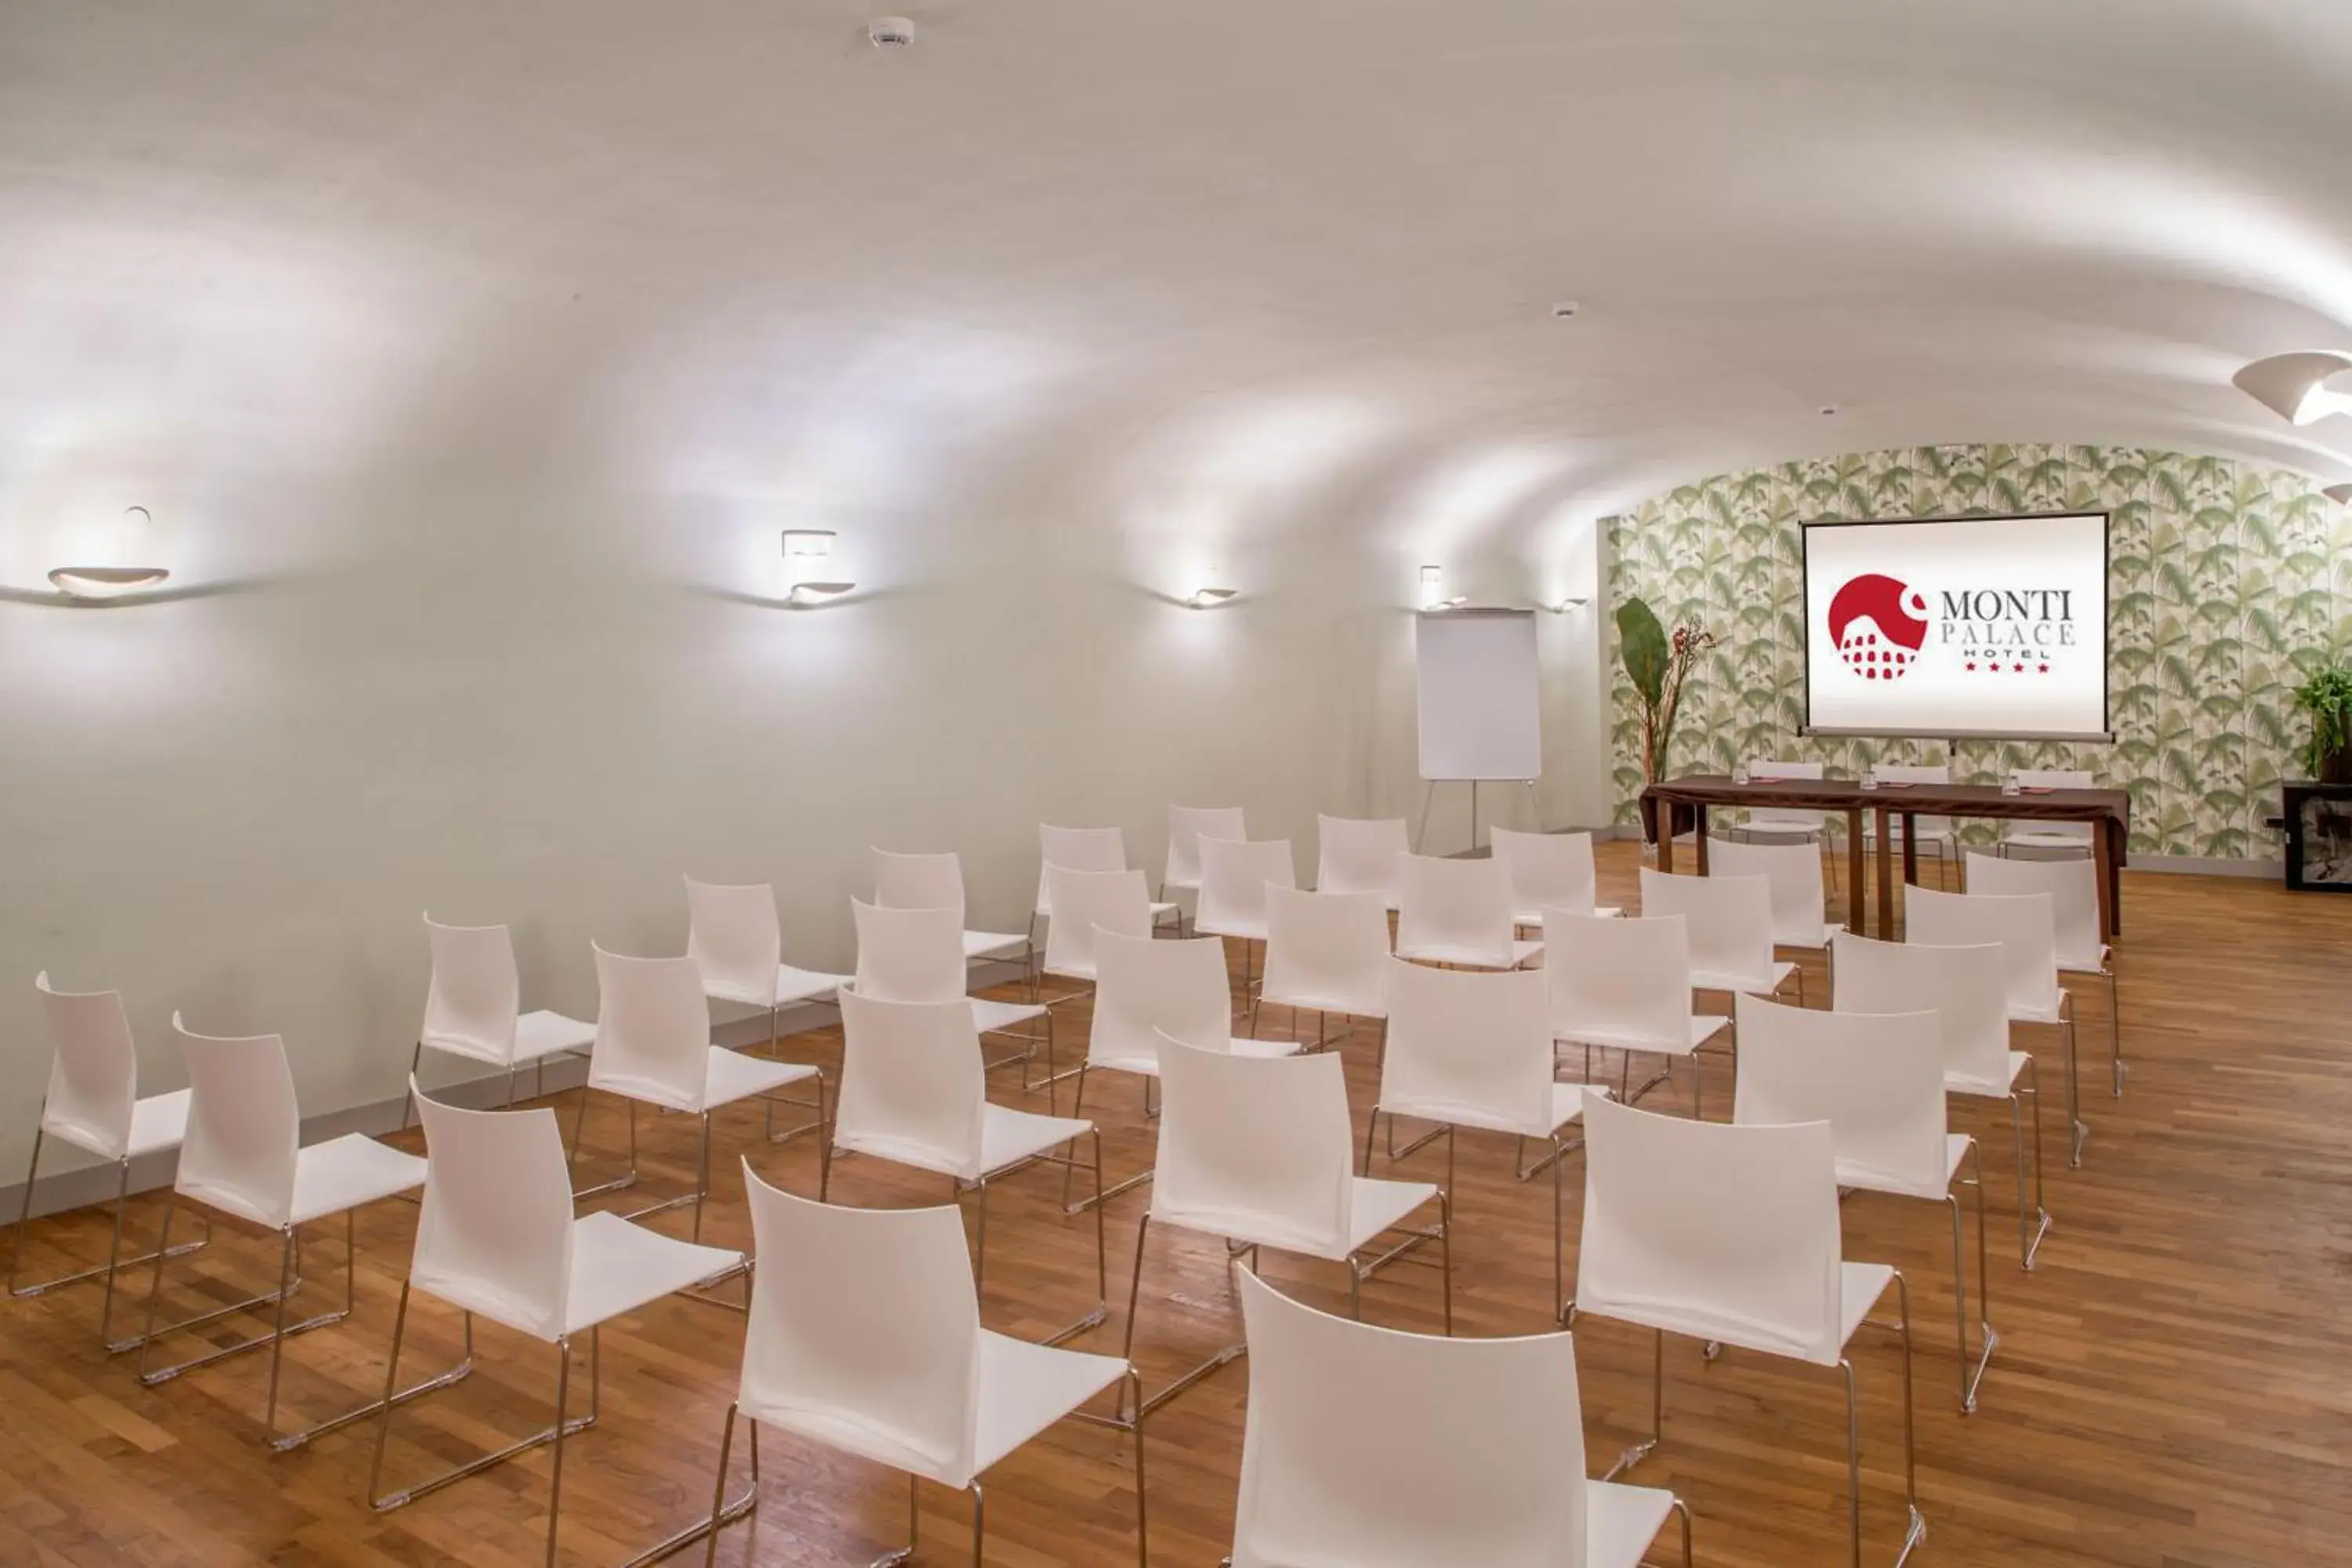 Meeting/conference room, Banquet Facilities in Monti Palace Hotel